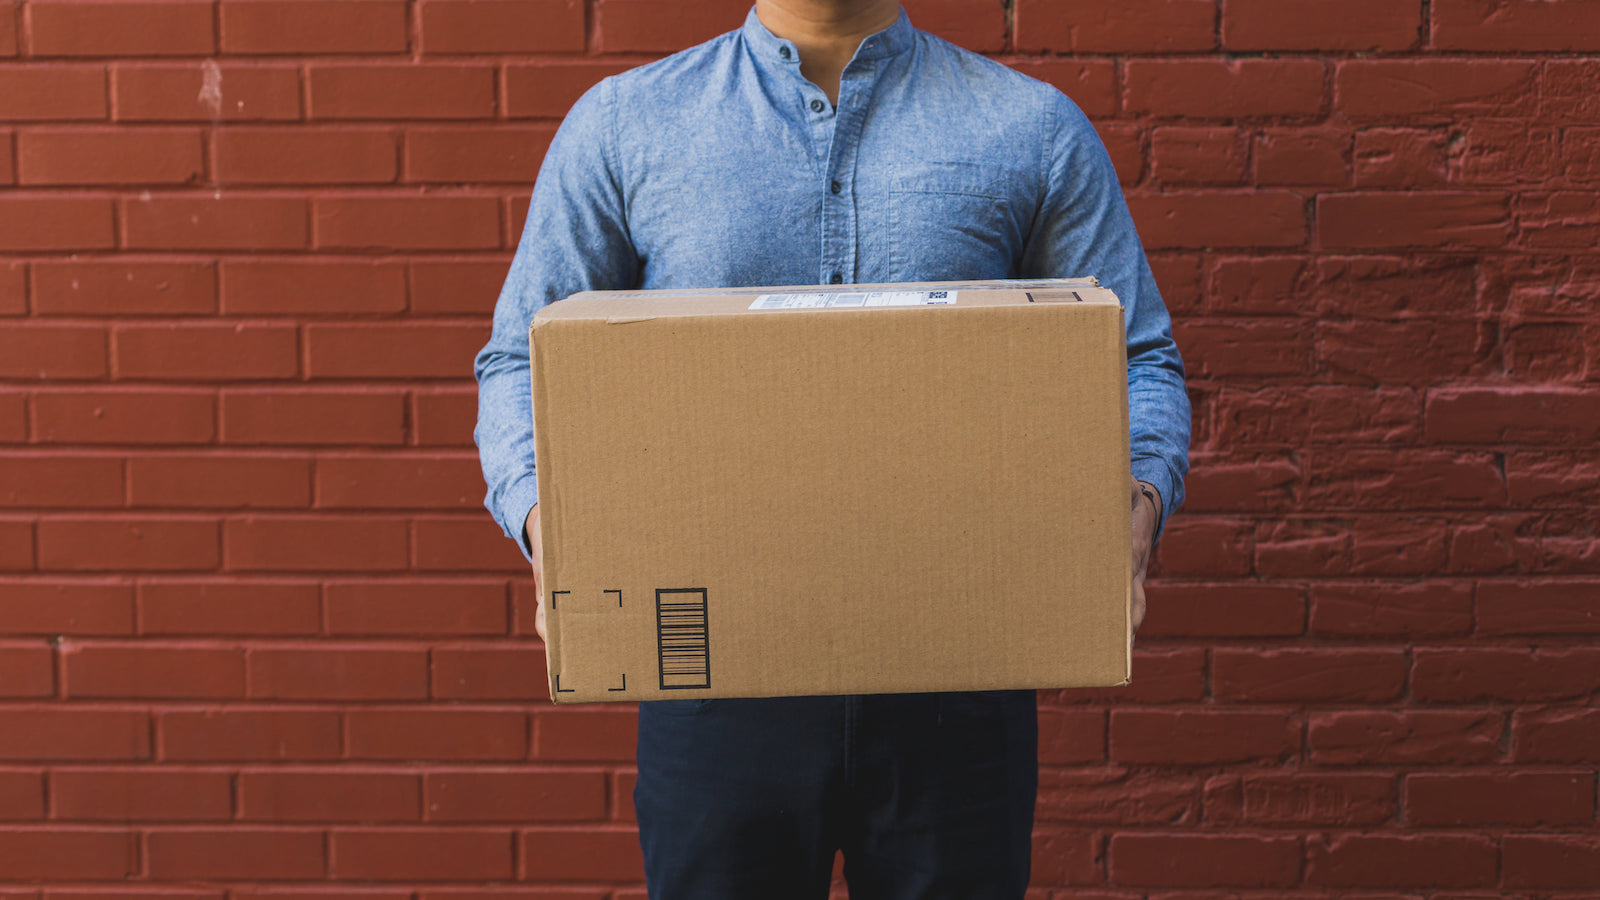 Standard Shipping: Essential Ecommerce Guide for 2022